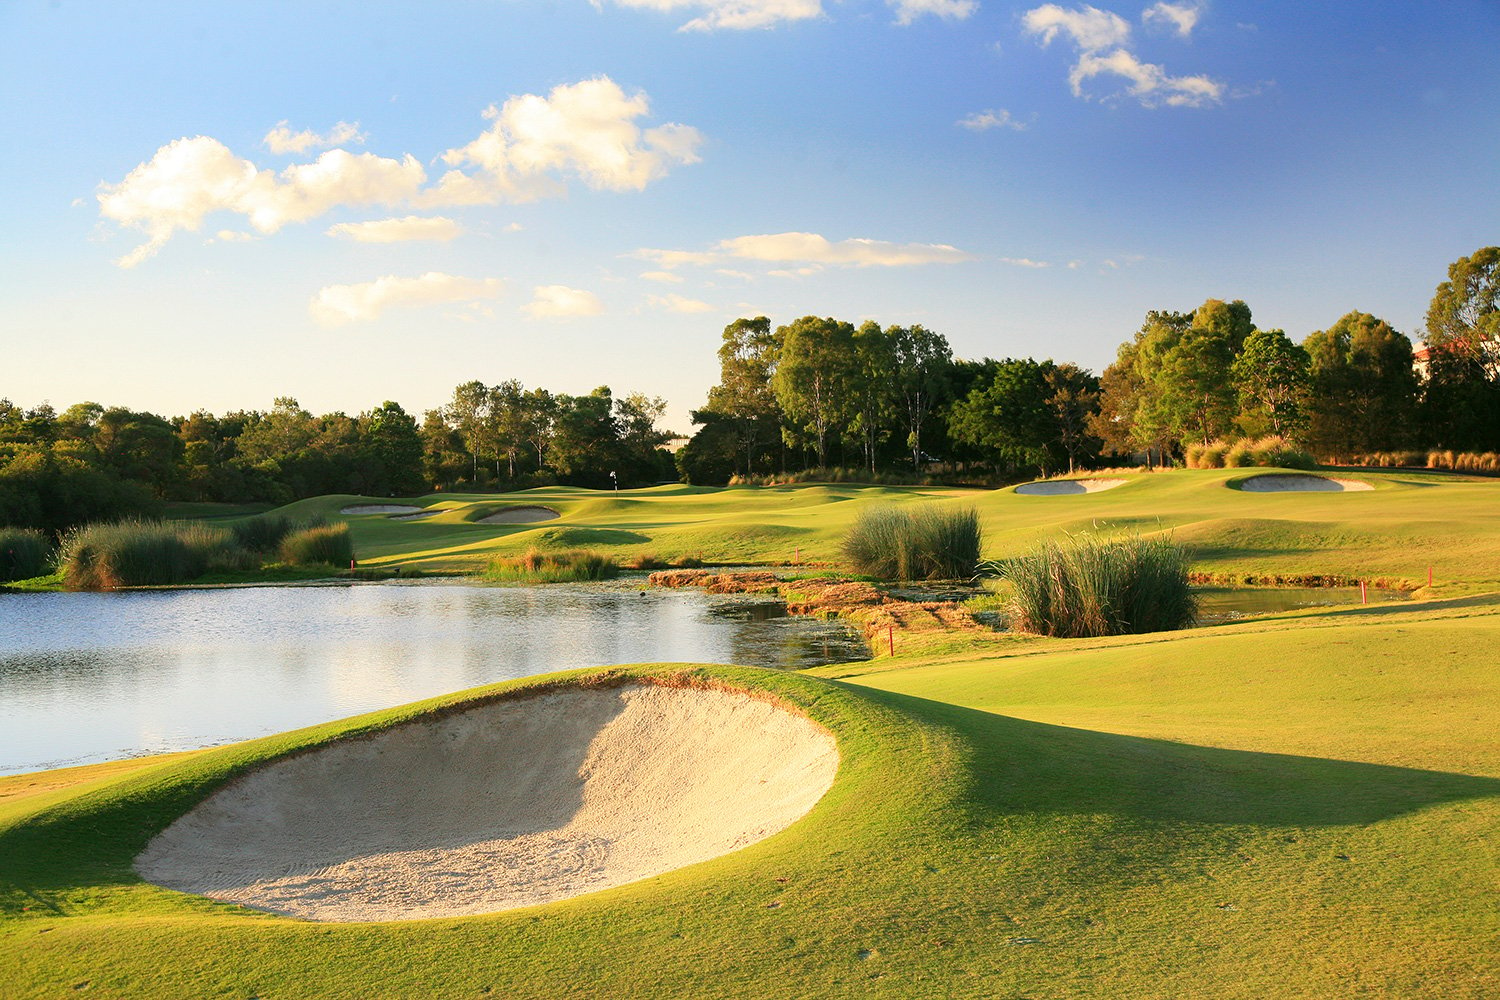 Links Hope Island on Queensland’s Gold Coast intermingles the tenacious Thomson pot bunkers  with water hazards and tropical vegetation.